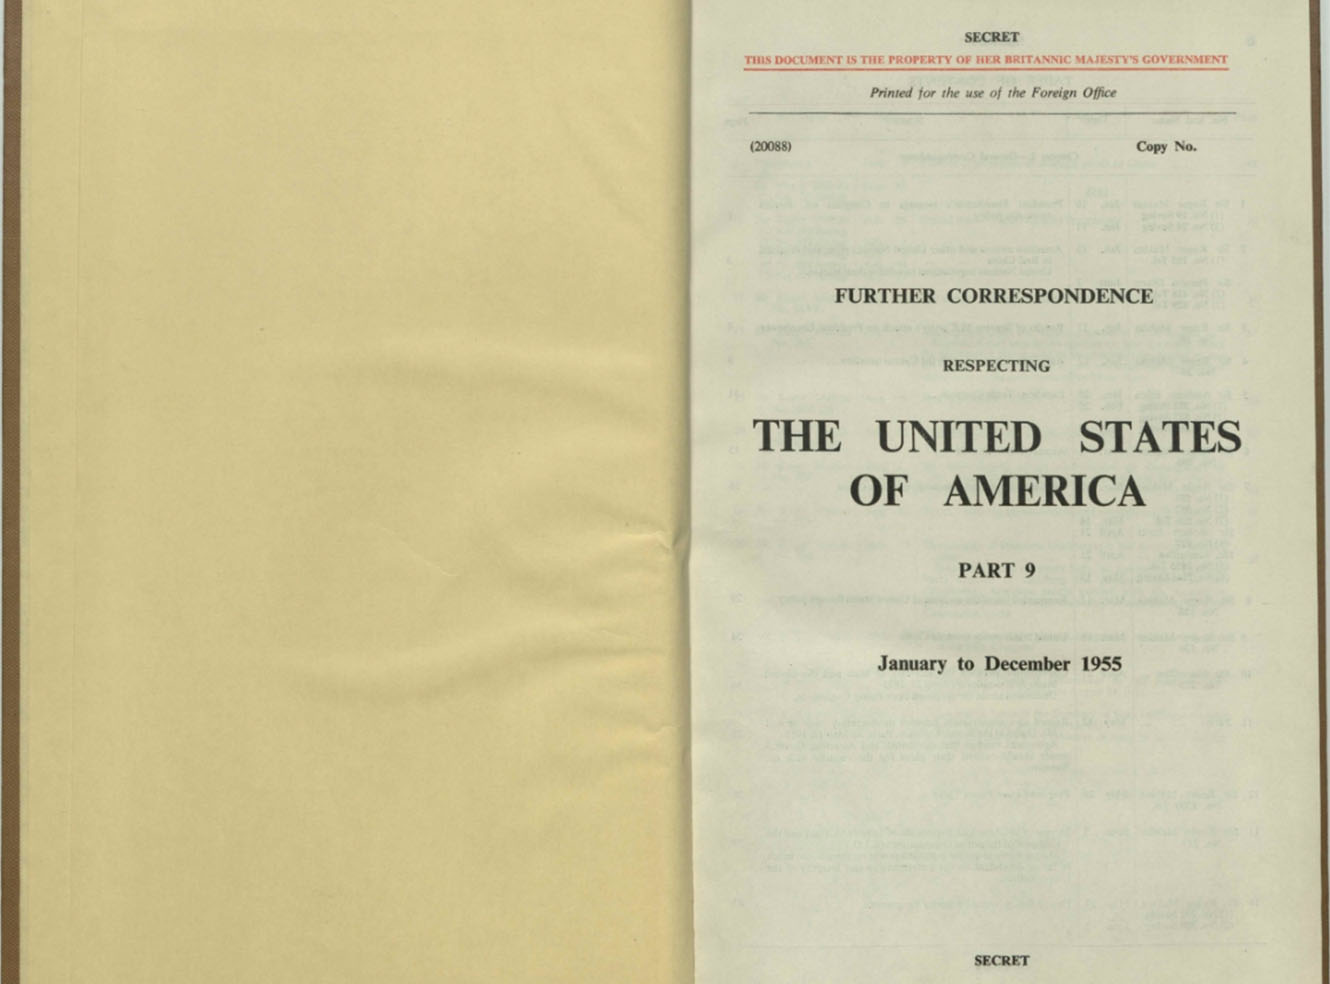 Archives Direct: Confidential Print: North America, 1824-1961